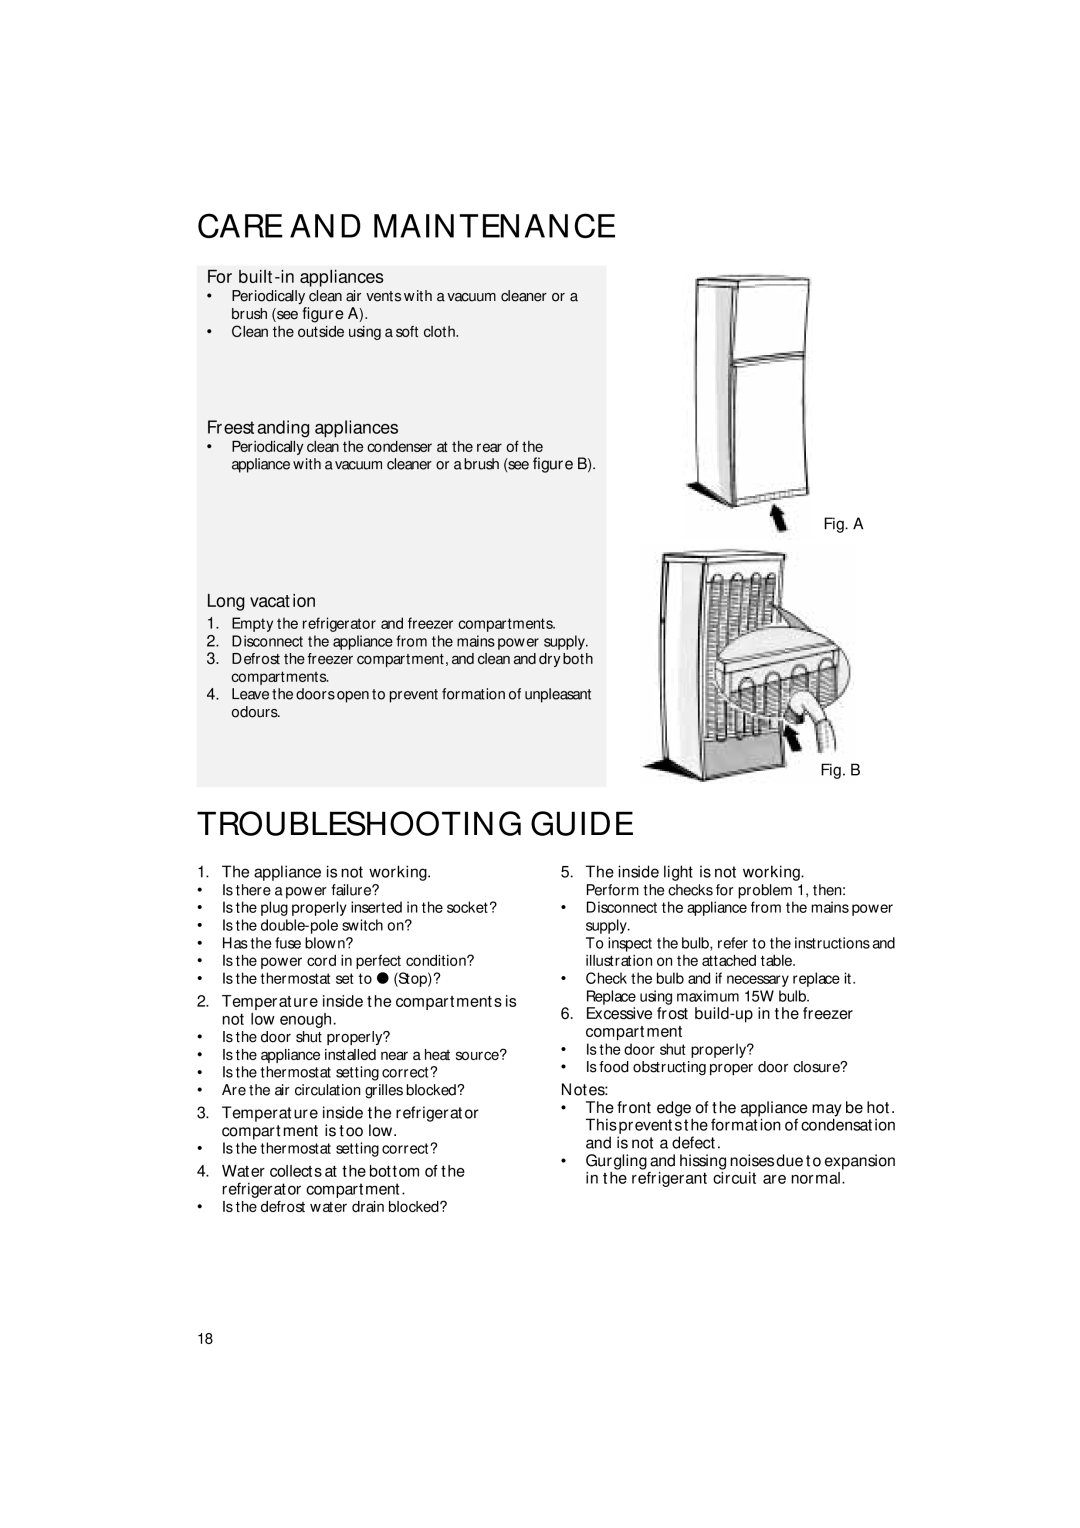 Smeg FR238A7 Care And Maintenance, Troubleshooting Guide, For built-in appliances, Freestanding appliances, Long vacation 